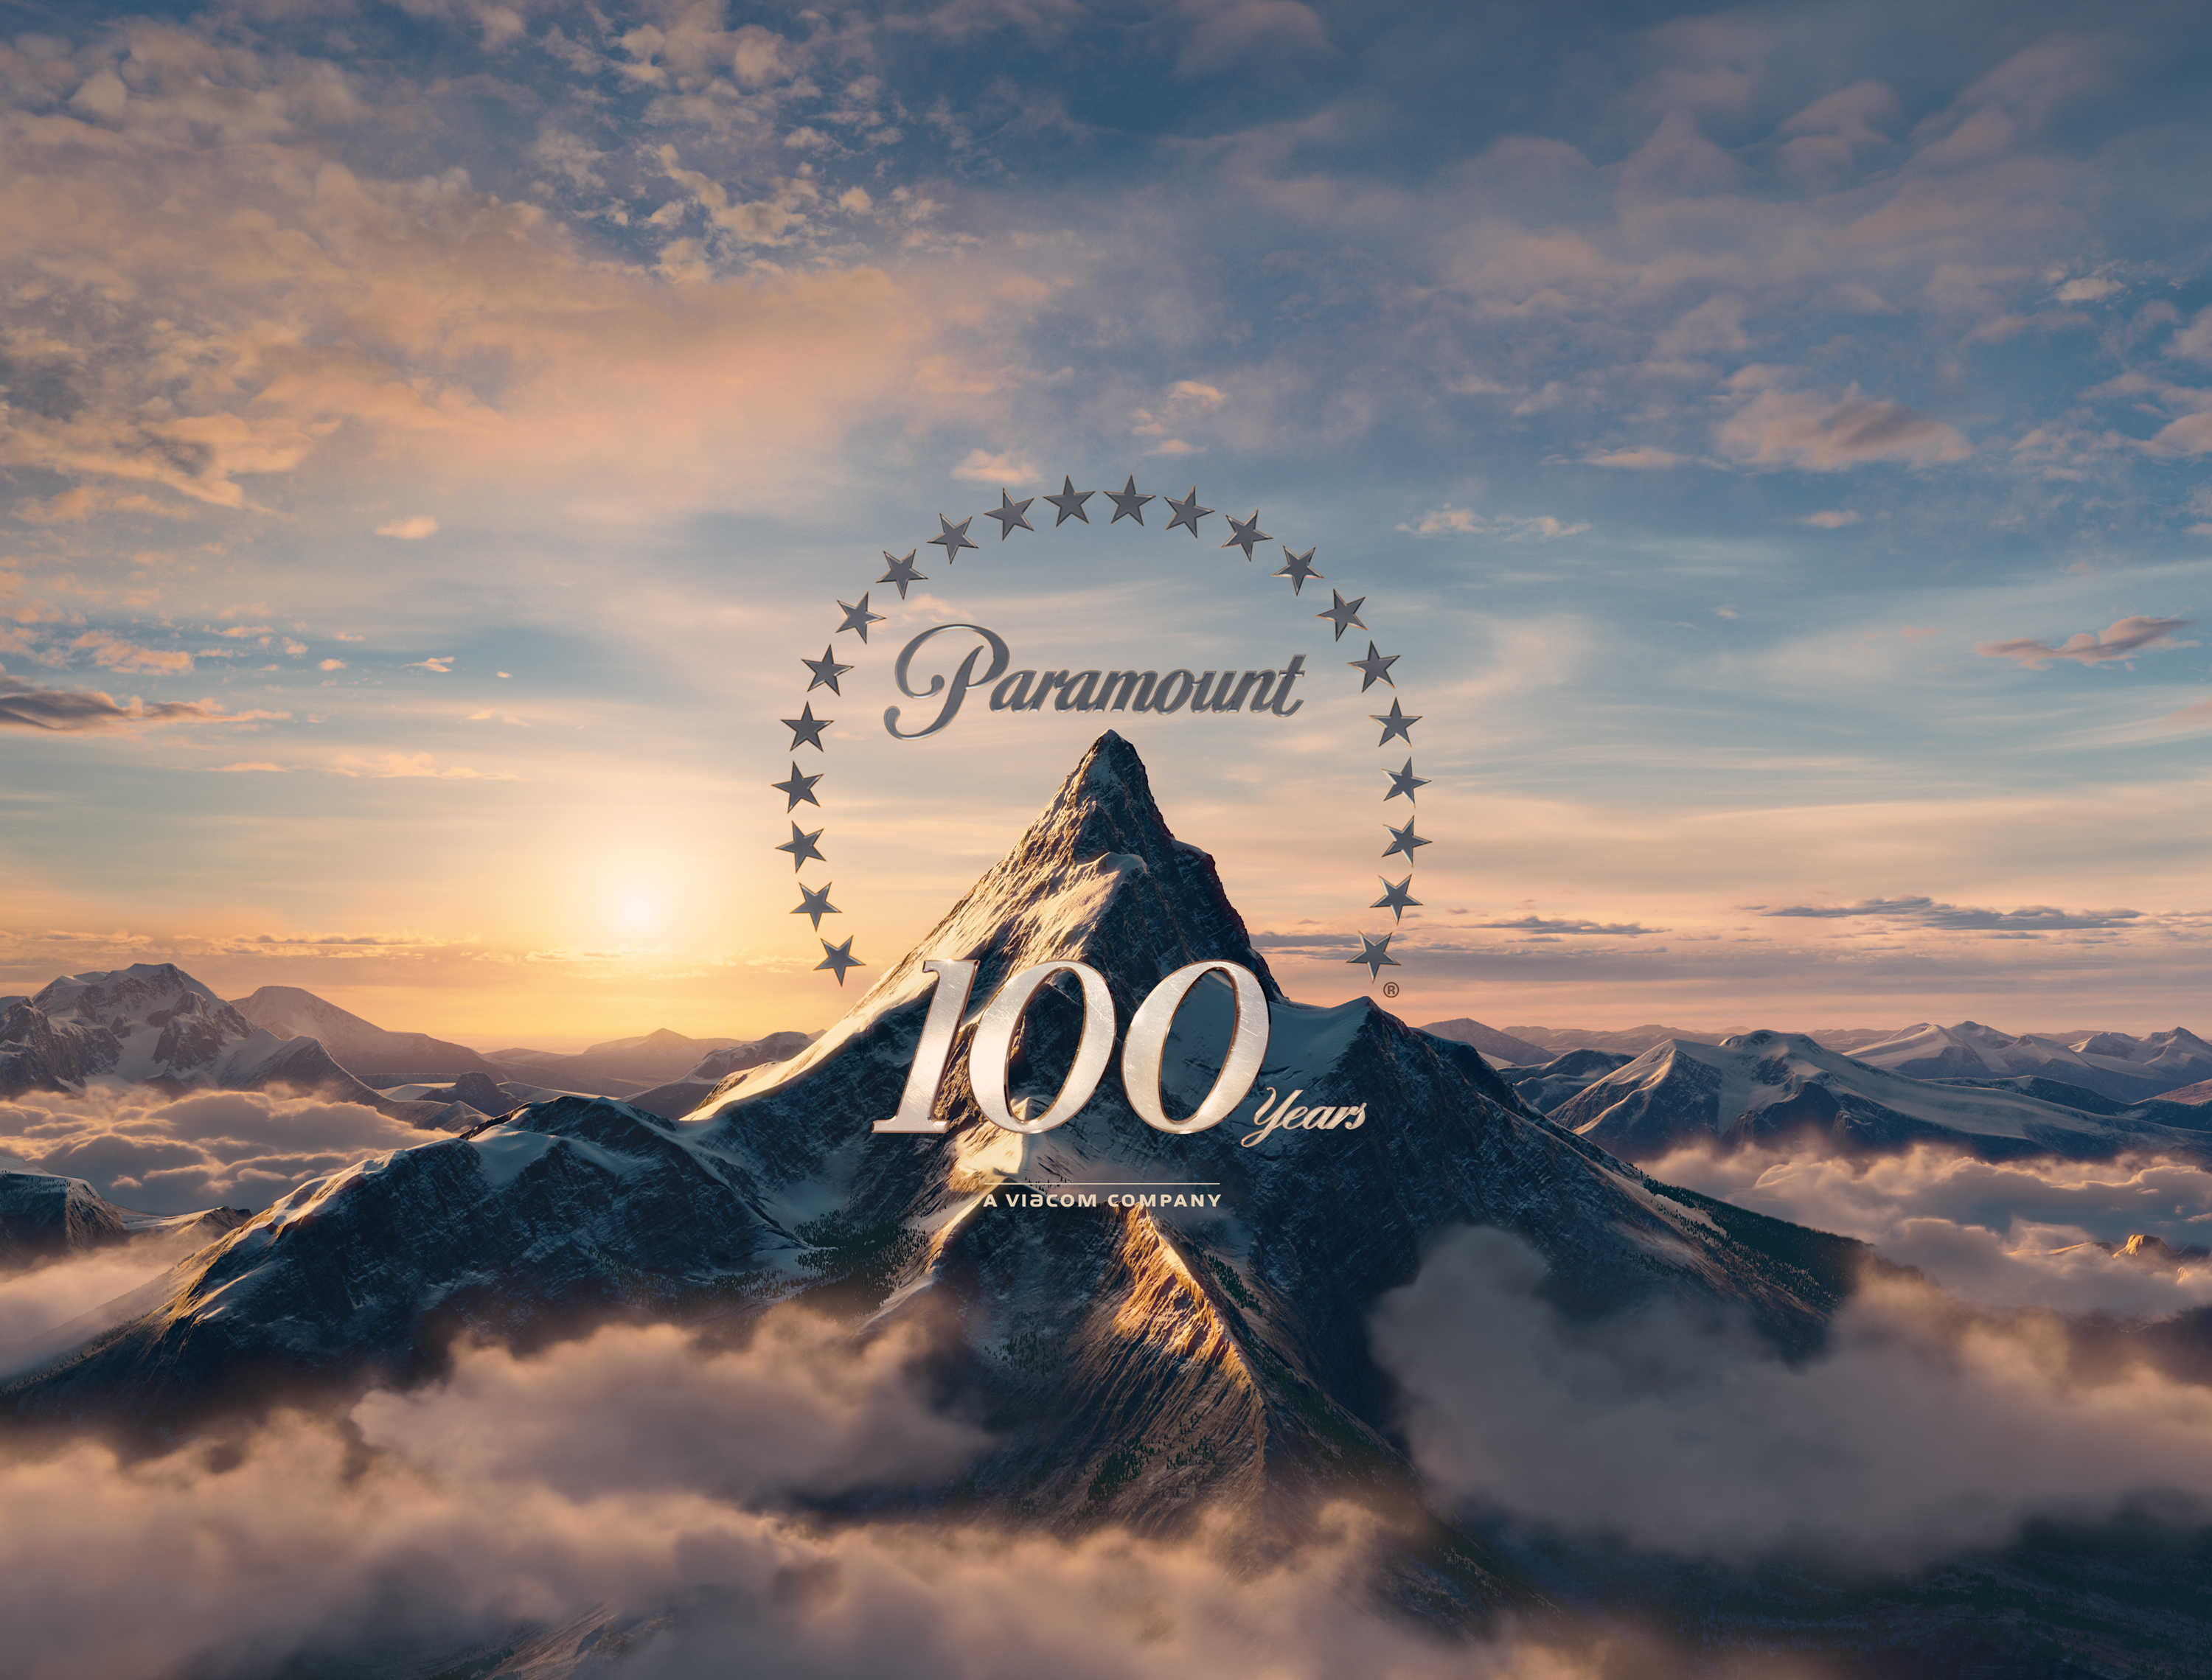 Paramount Logo - Paramount Pictures Celebrates 100 Years With A New Logo